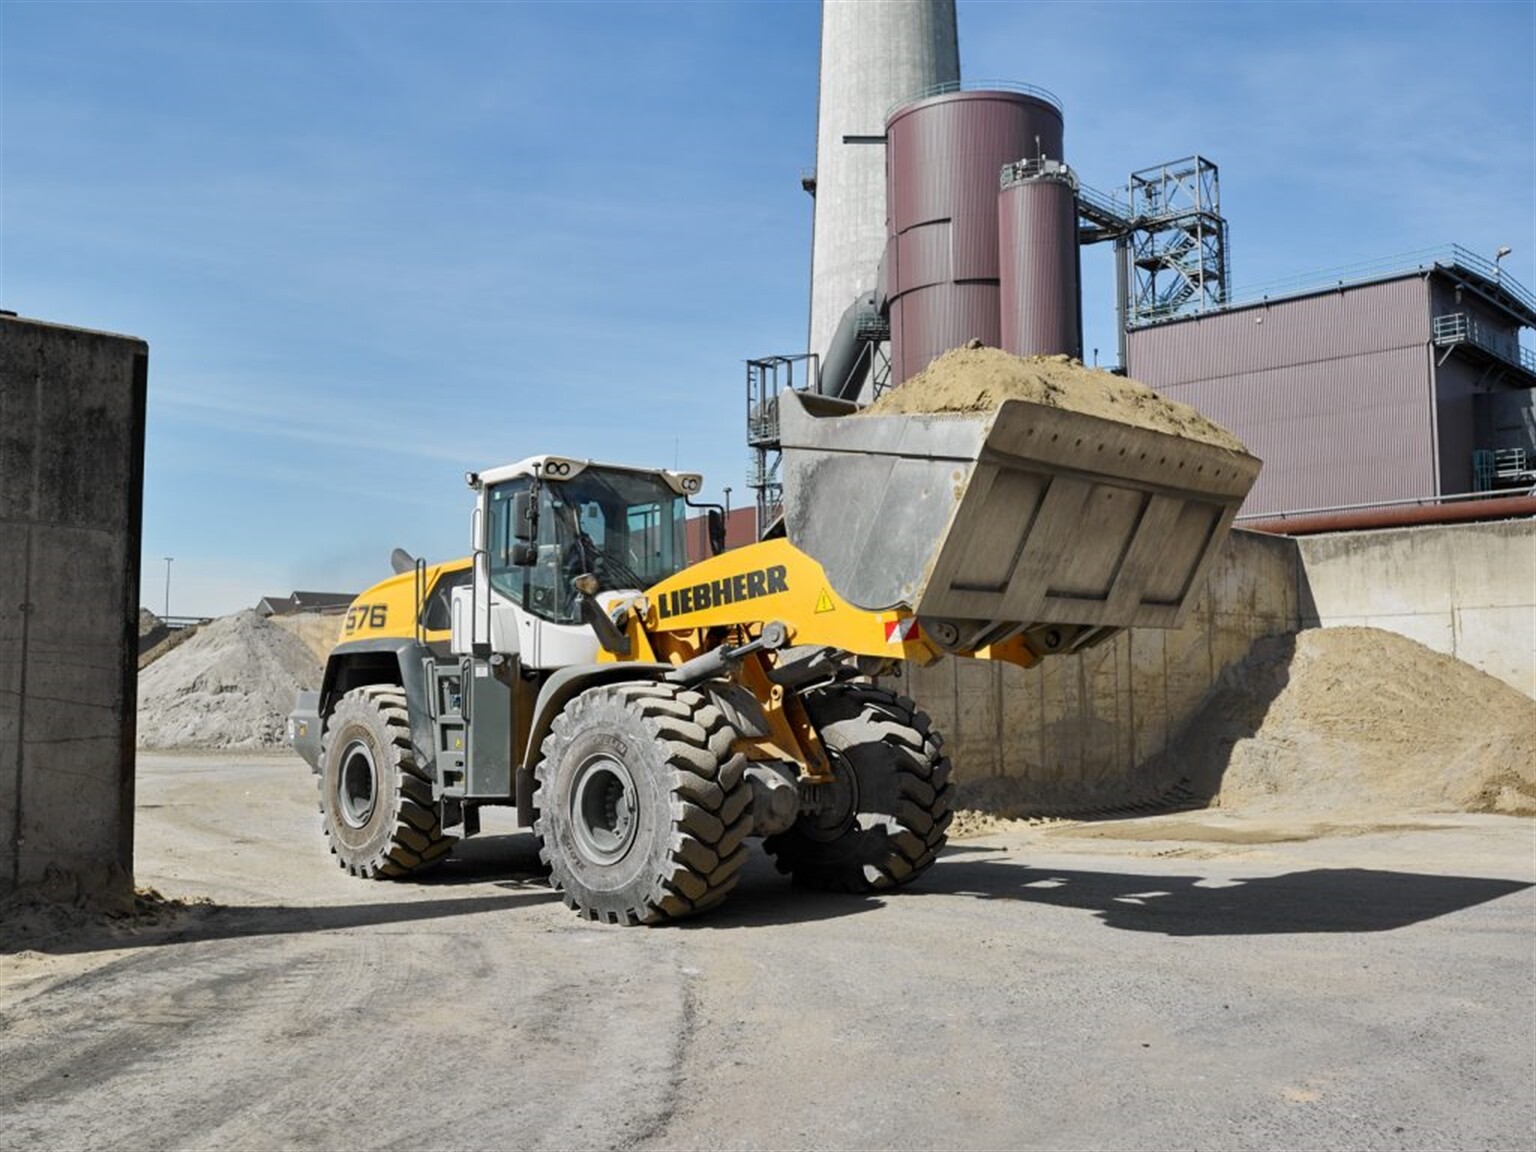 German recycling specialist gets the Power from Liebherr